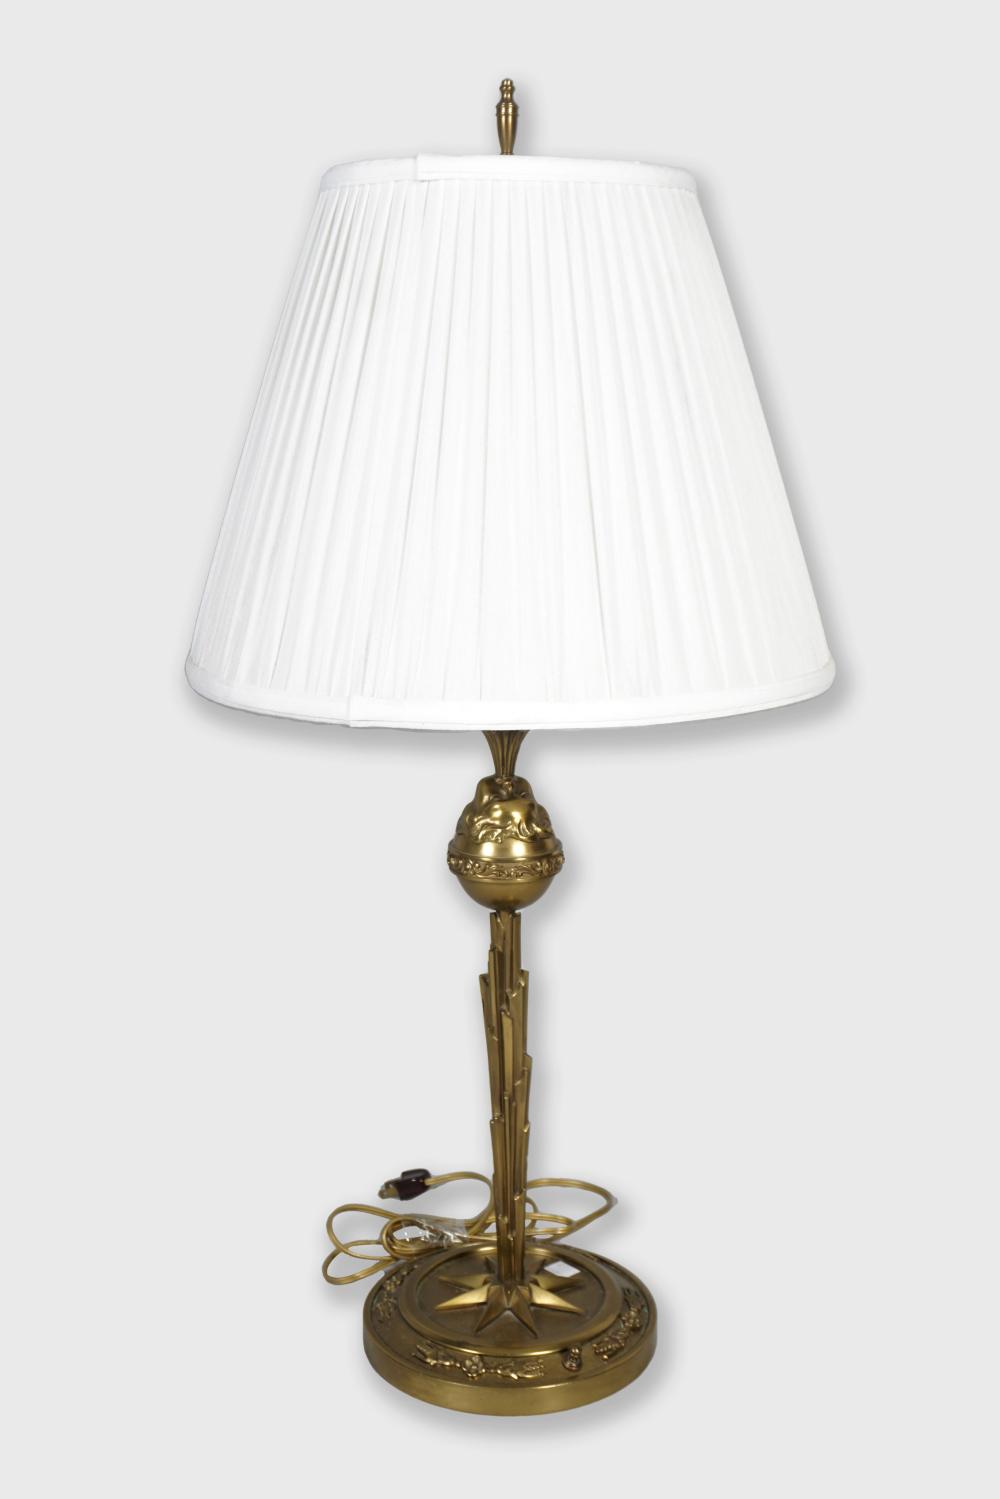 BRONZE TABLE LAMP WITH SHADEBRONZE TABLE